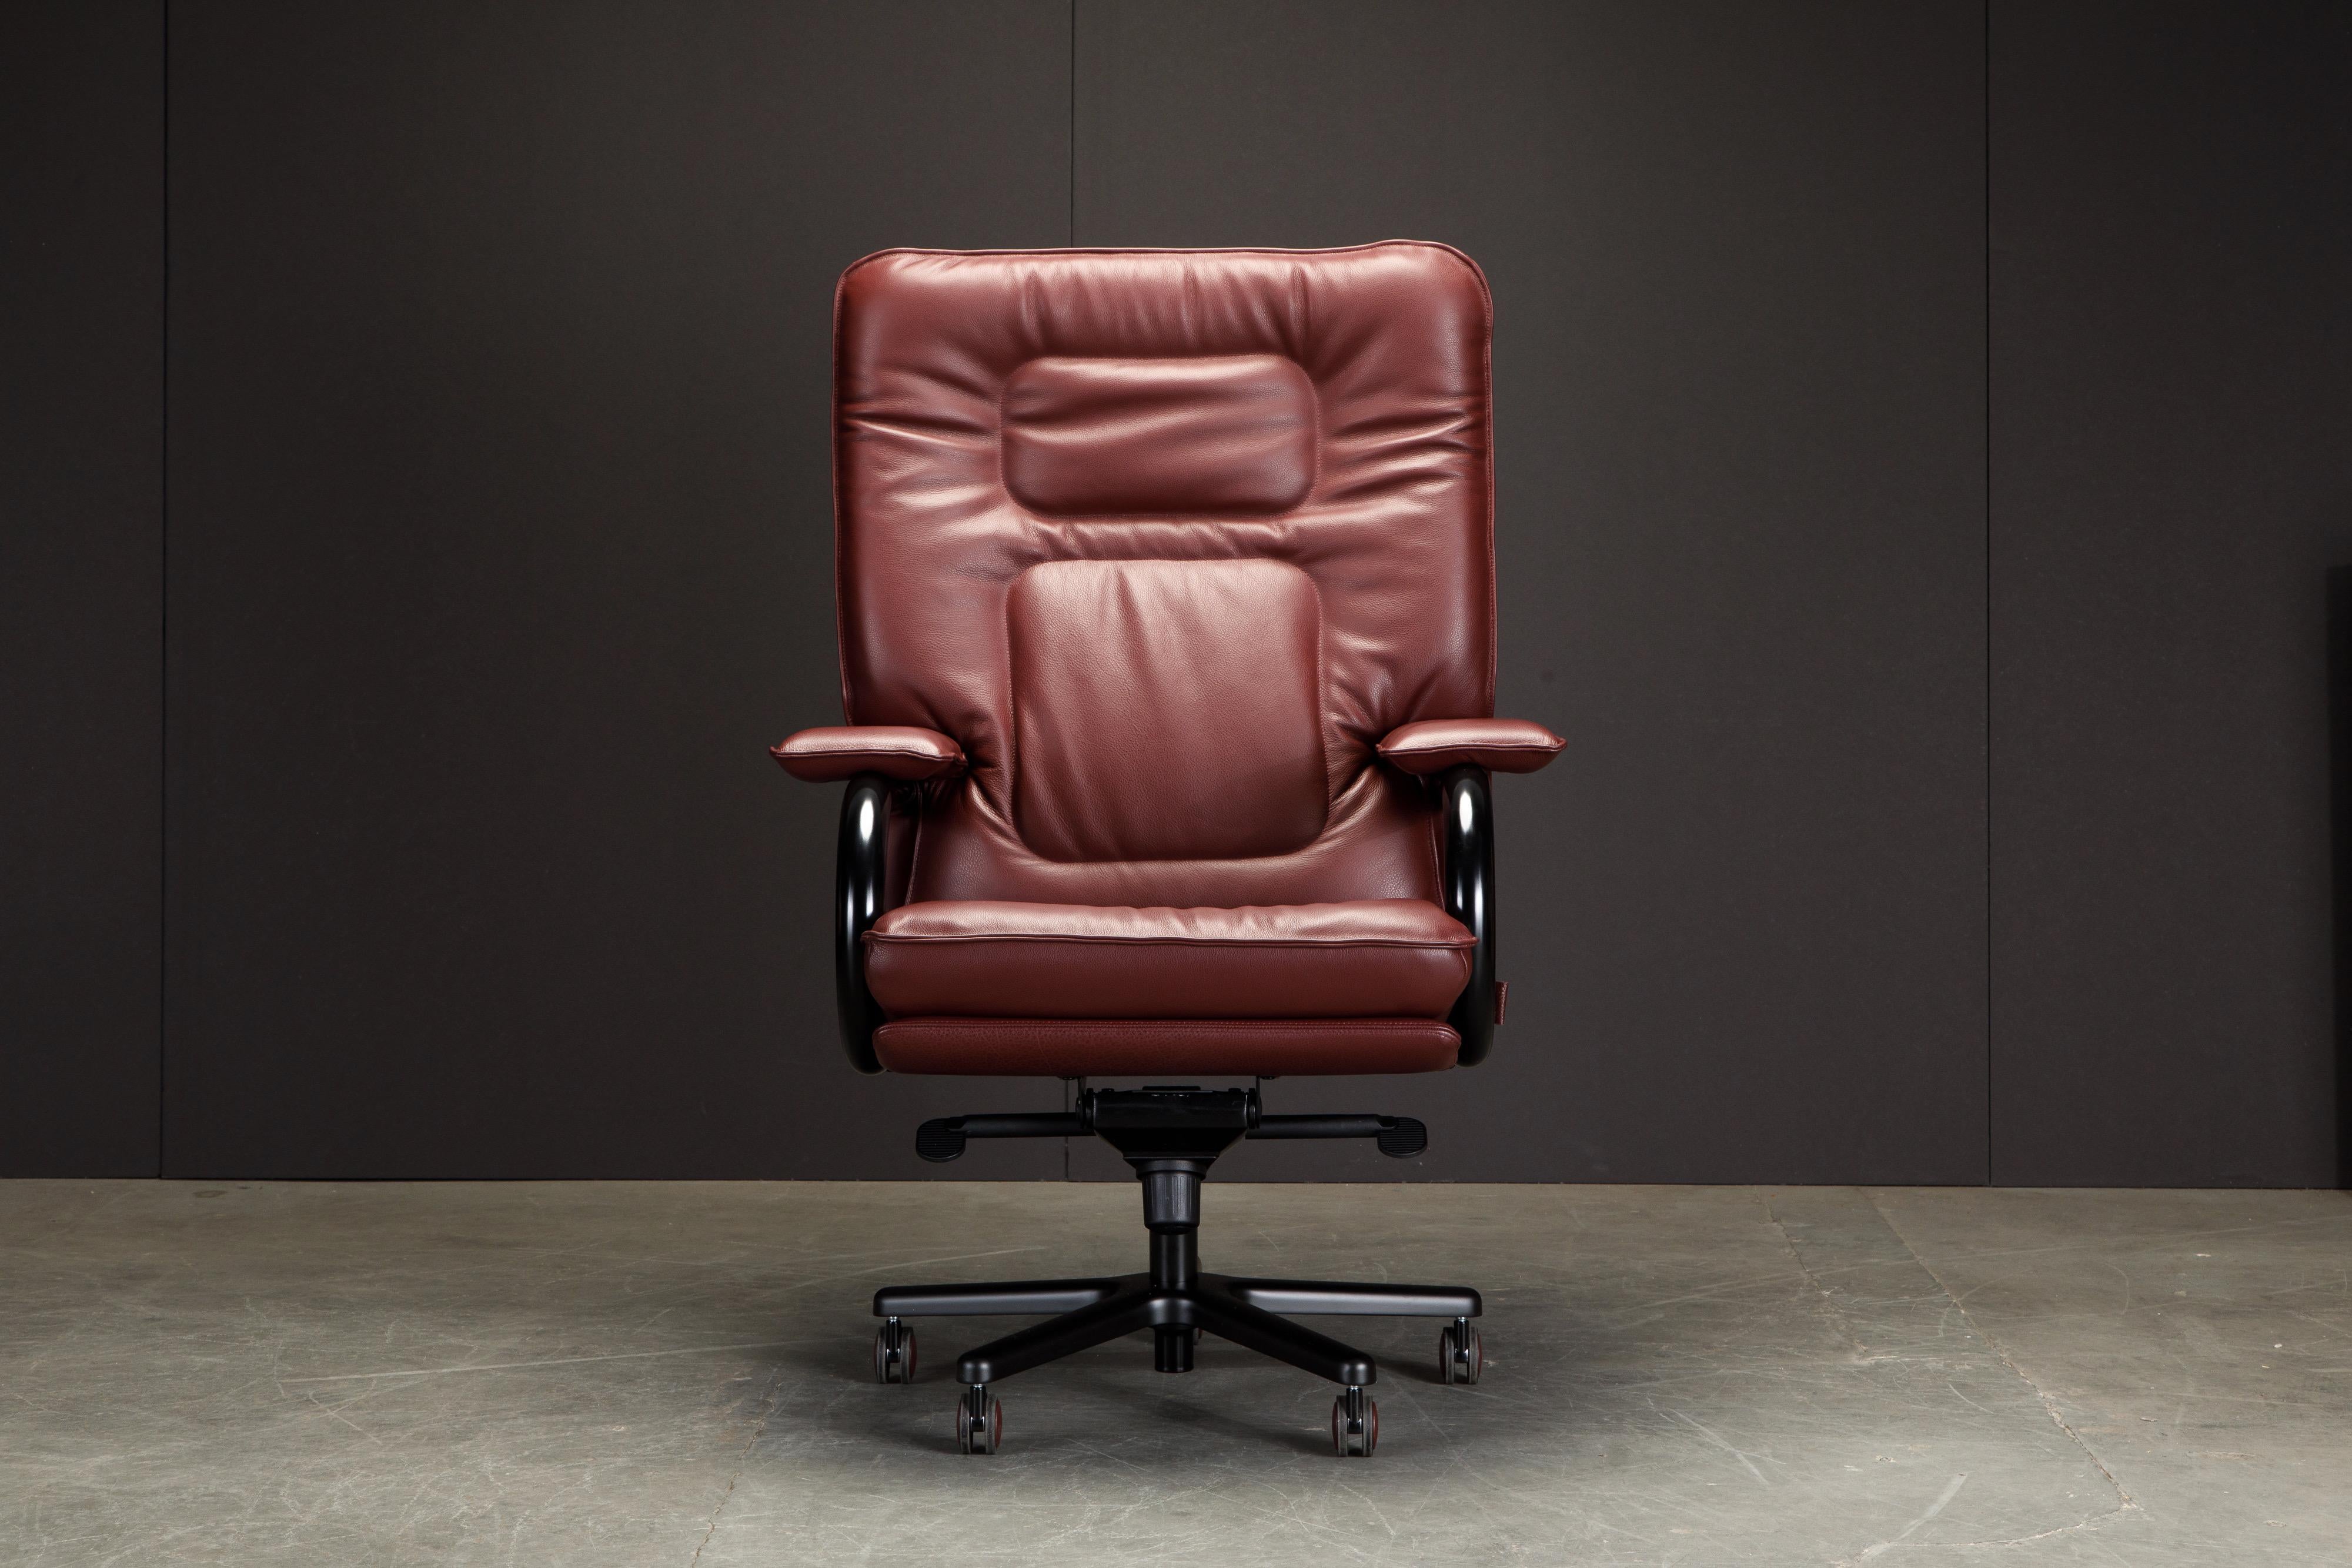 This incredible executives chair is named 'Big', designed by Guido Faleschini by i4 Mariani originally designed in the 1970s, this example newly produced in a gorgeous burgundy leather with lacquered black frame, the same color combo as featured in